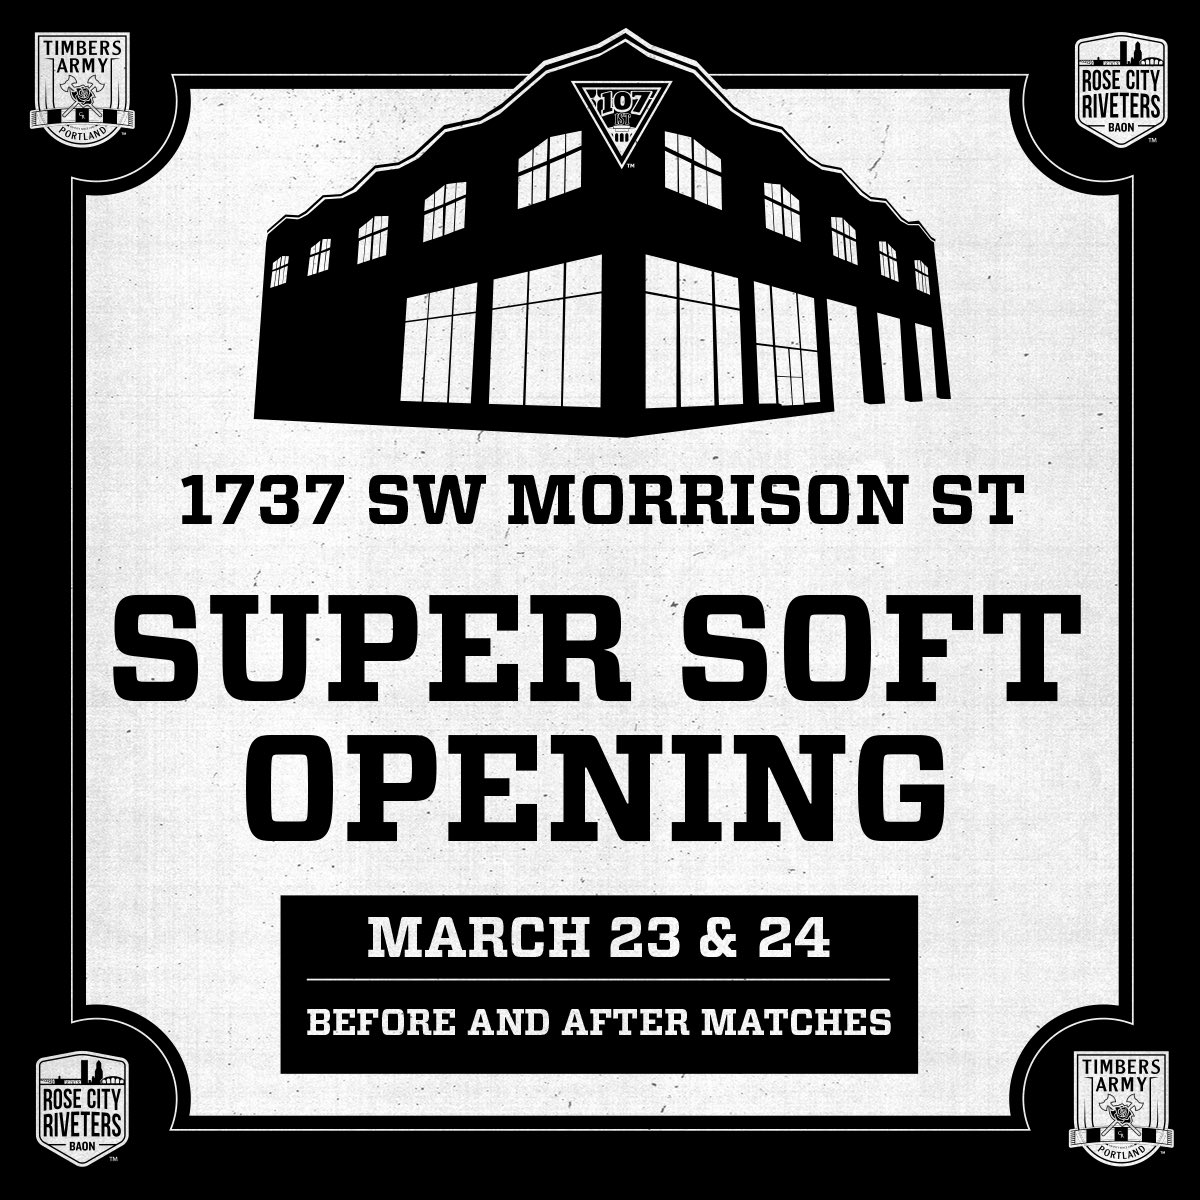 Join us on Saturday for the super soft opening of our new space at 1737 SW Morrison St. #RCTID